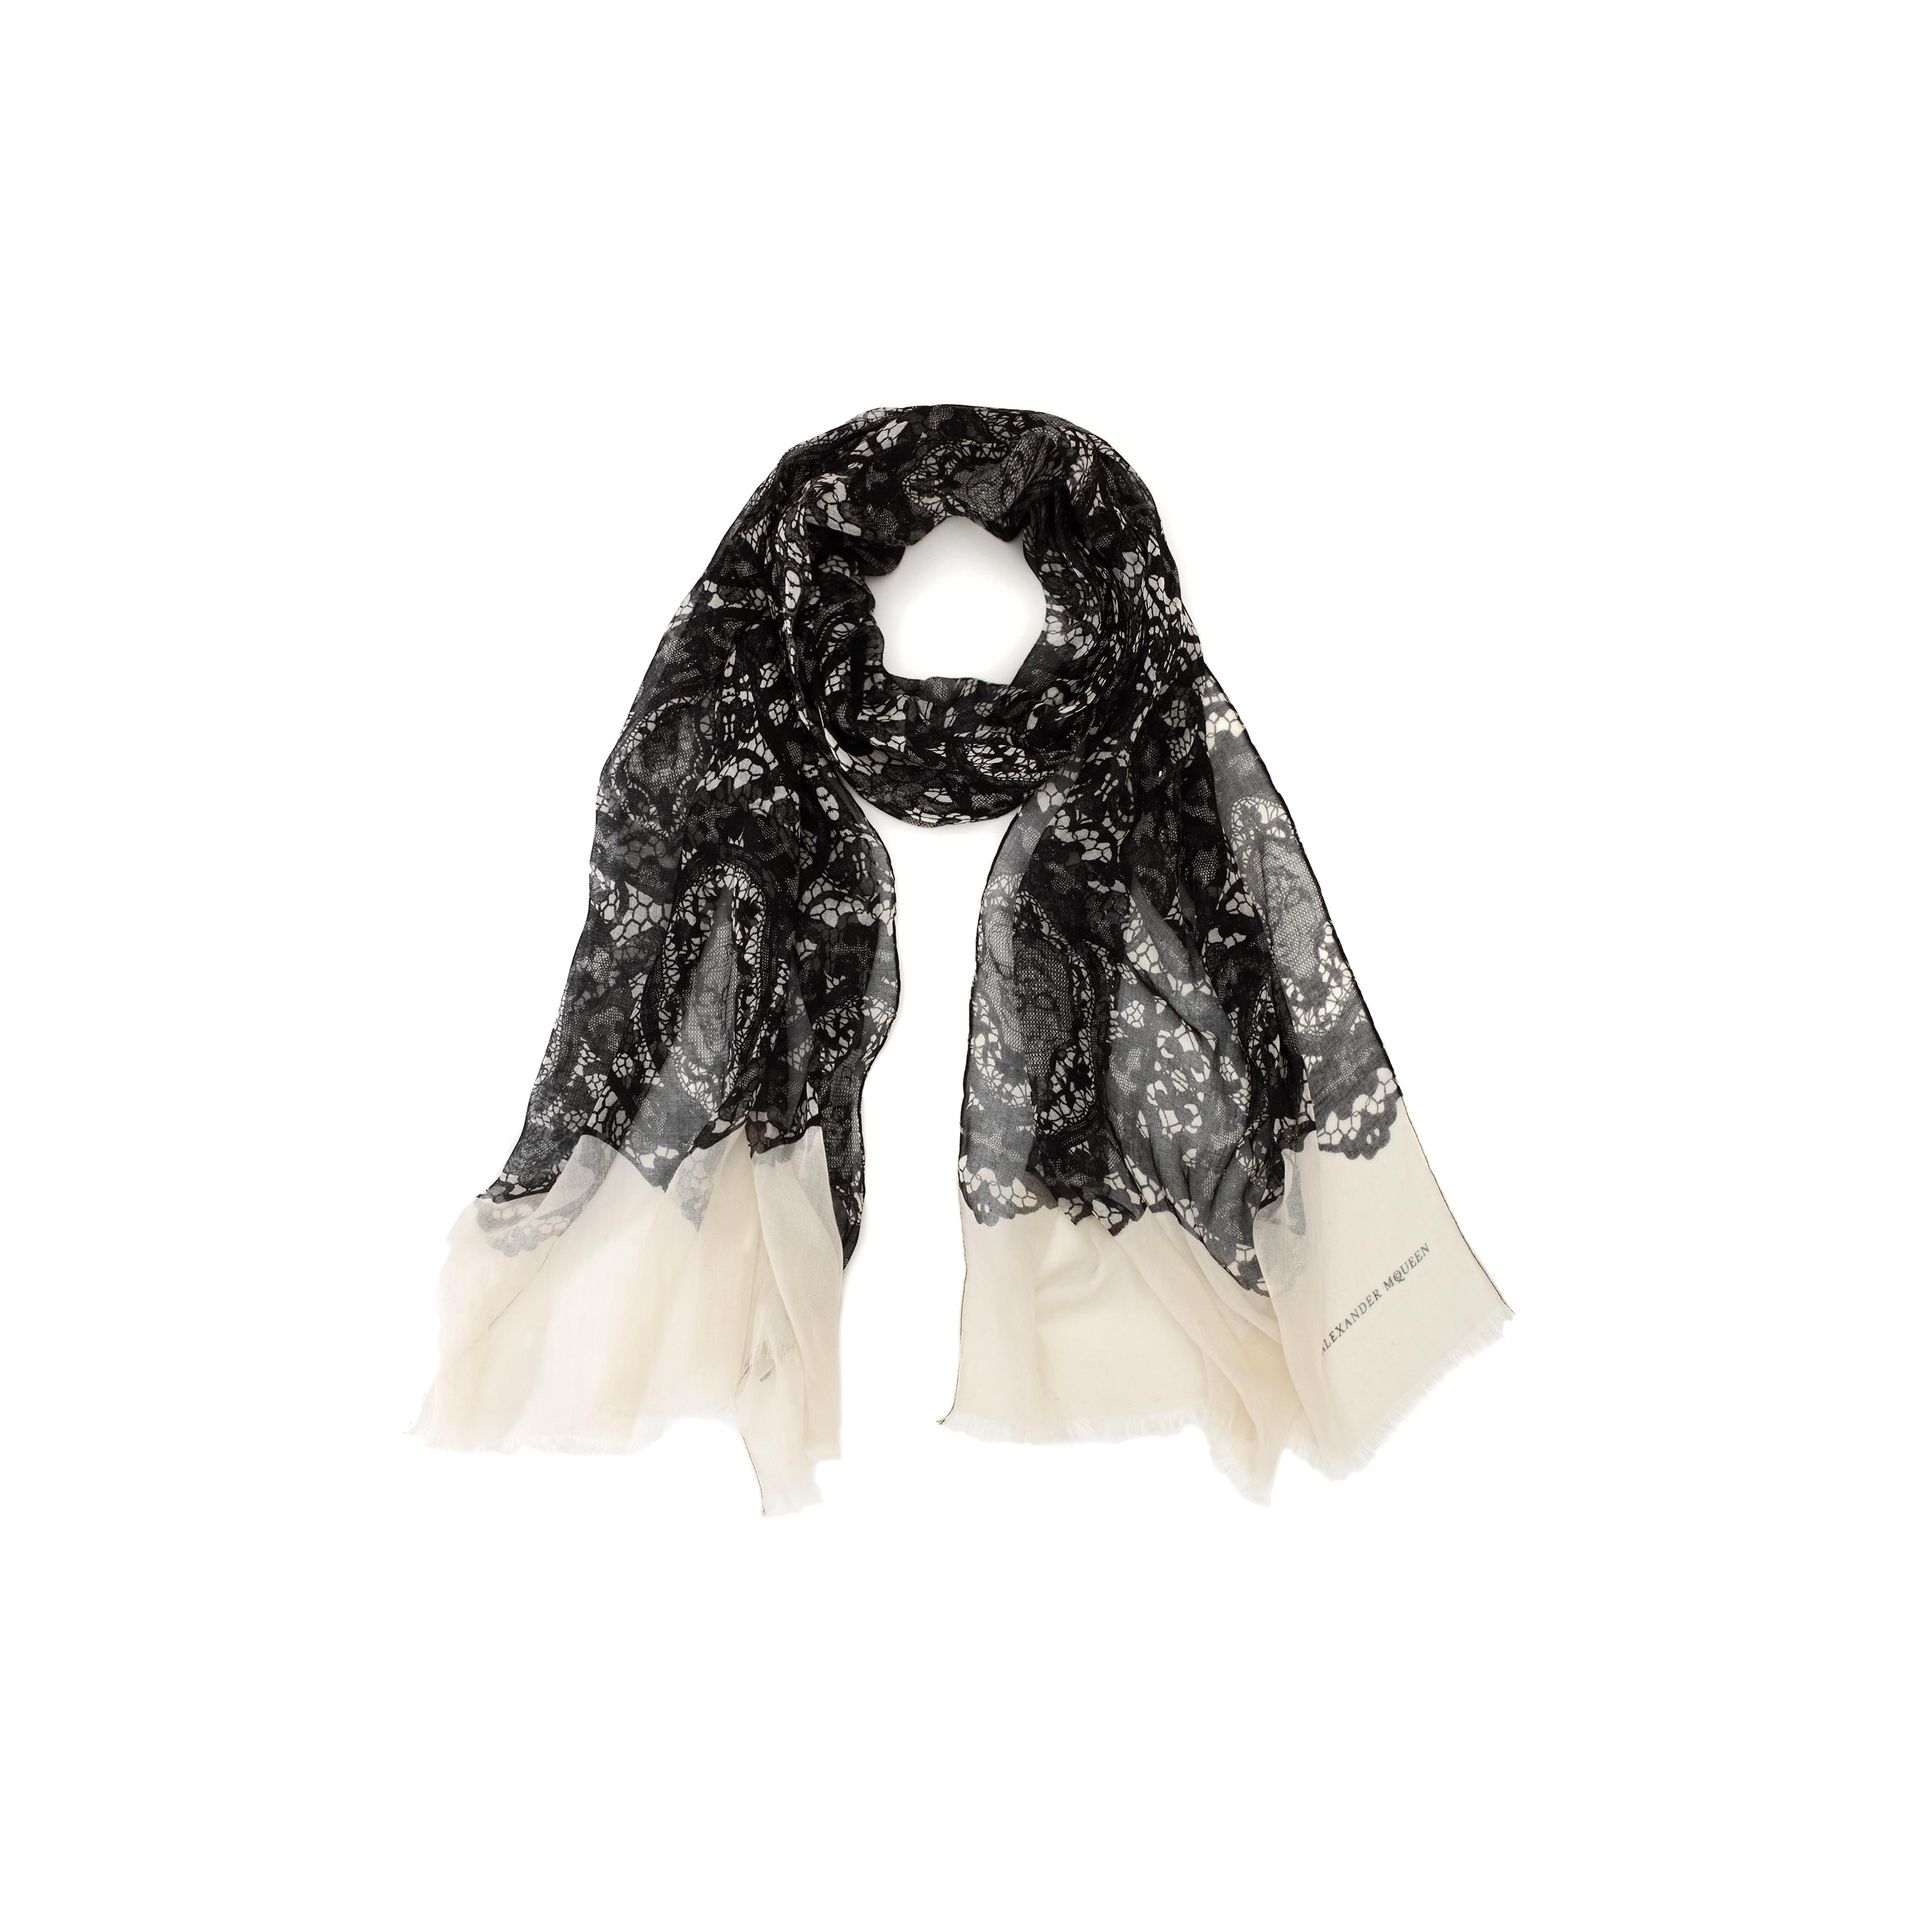 Oval Skull Lace Print Scarf Alexander McQueen | Men's Scarf | Ties And ...